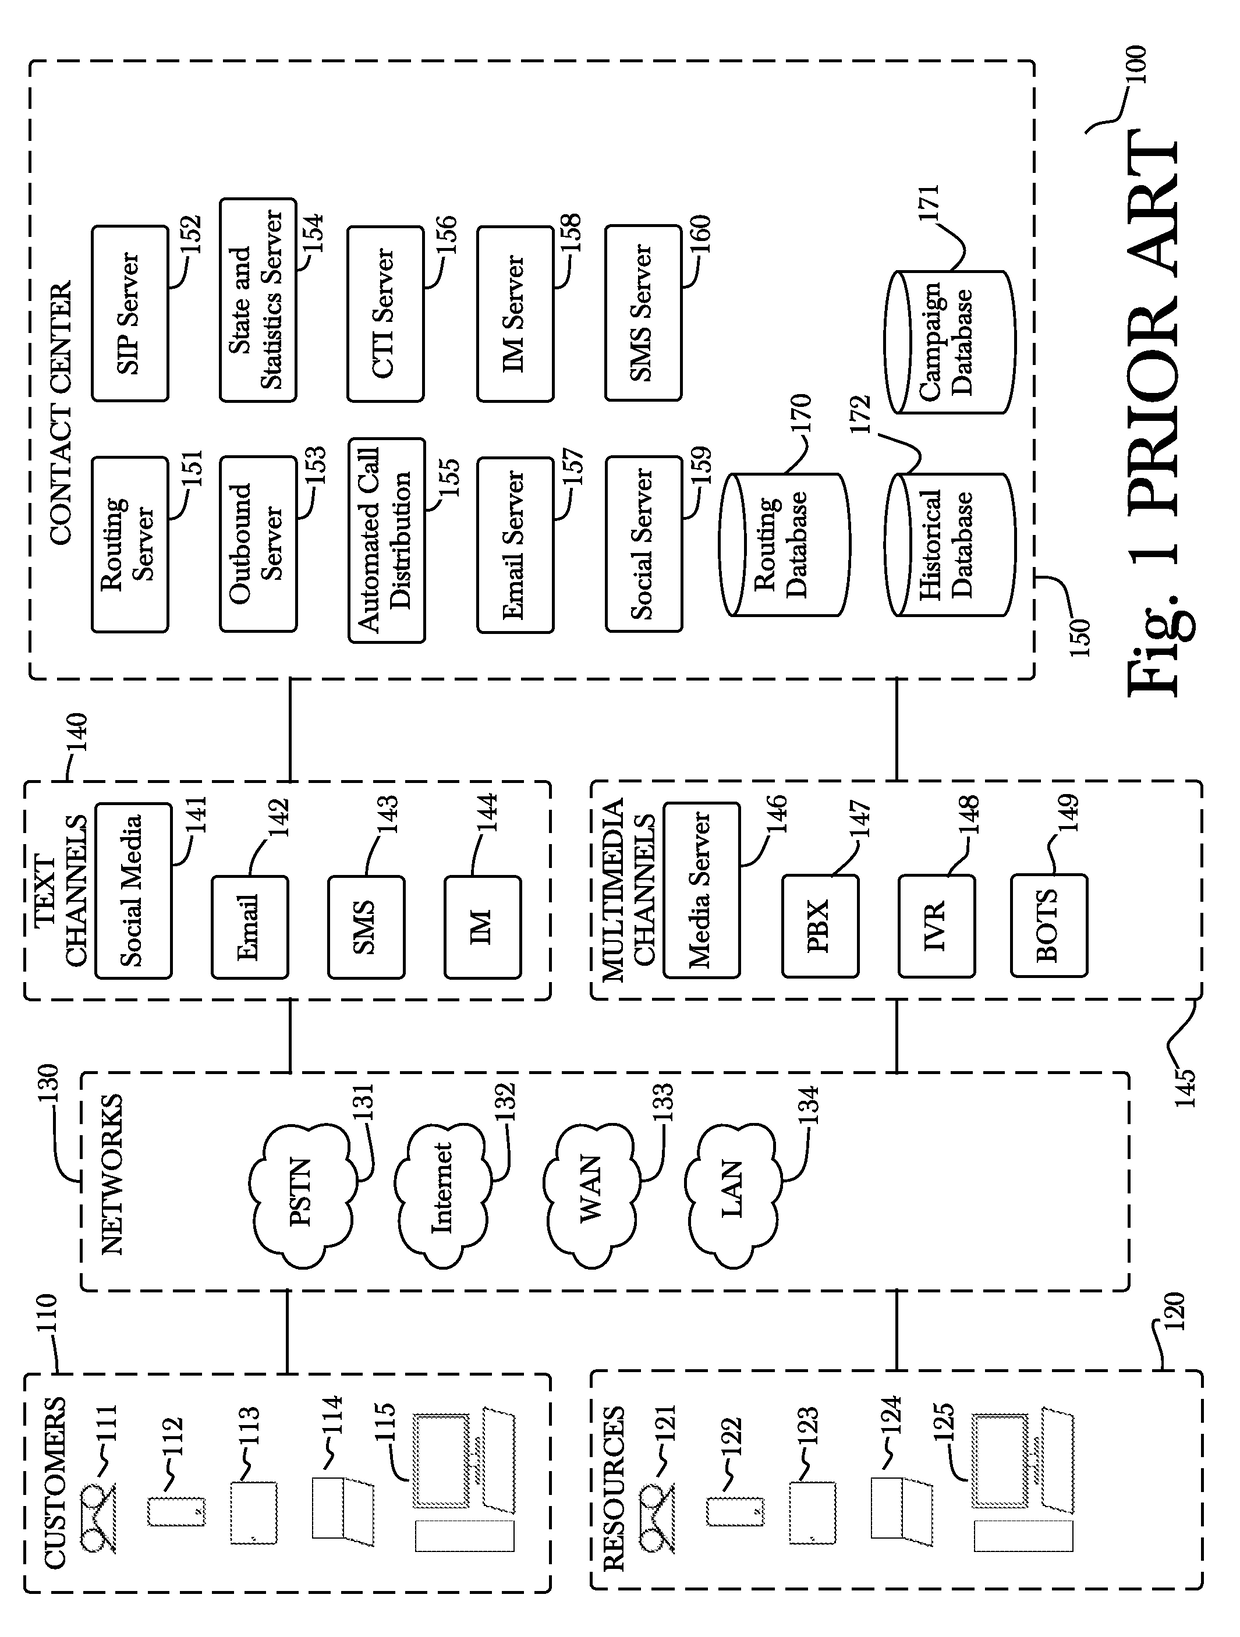 System and method for optimizing communications using reinforcement learning